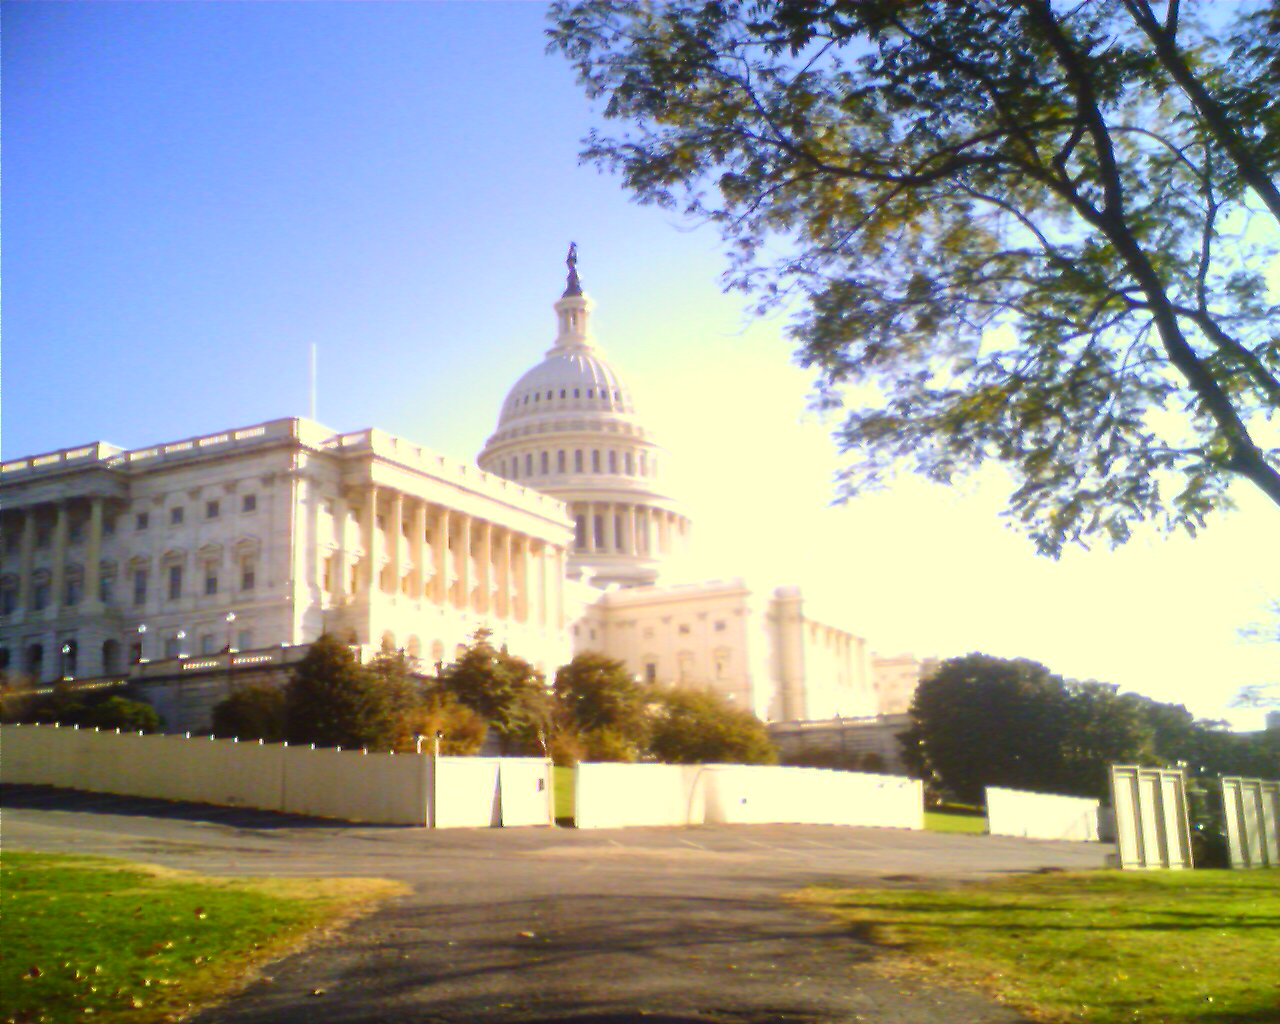 The Capitol Building